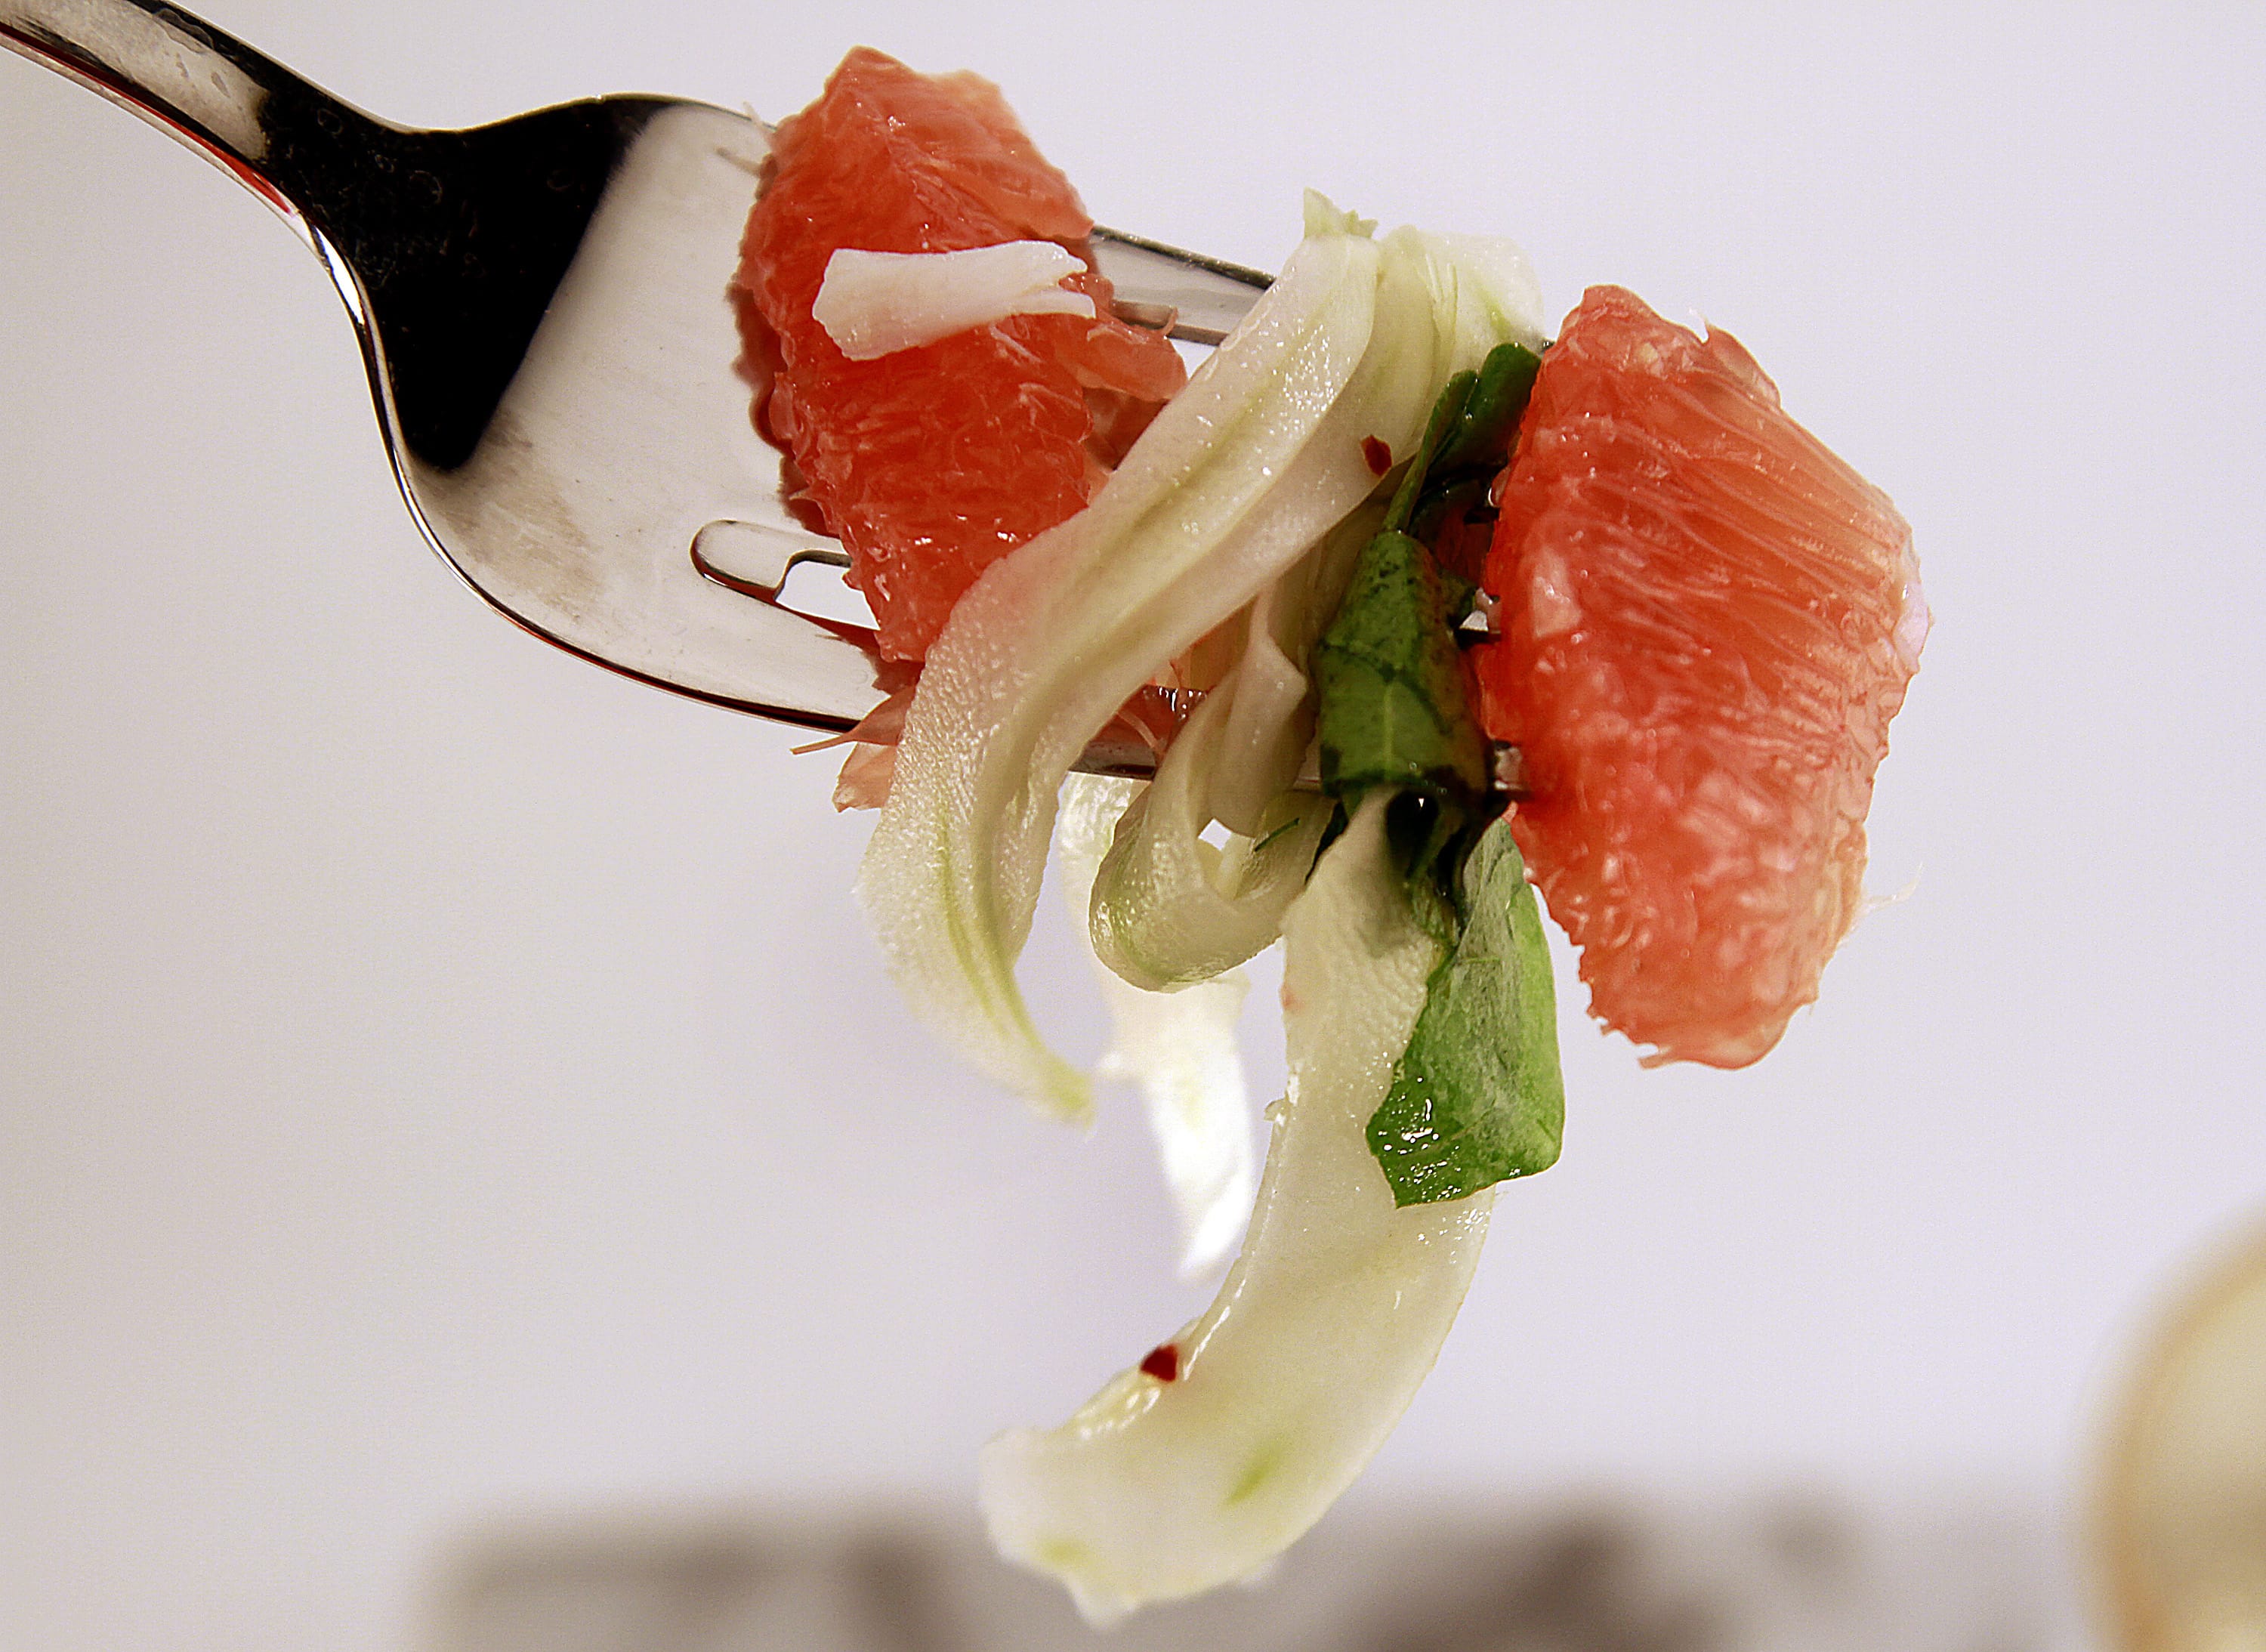 Pink grapefruit and fennel salad with crab makes for a tasty solution for citrus.